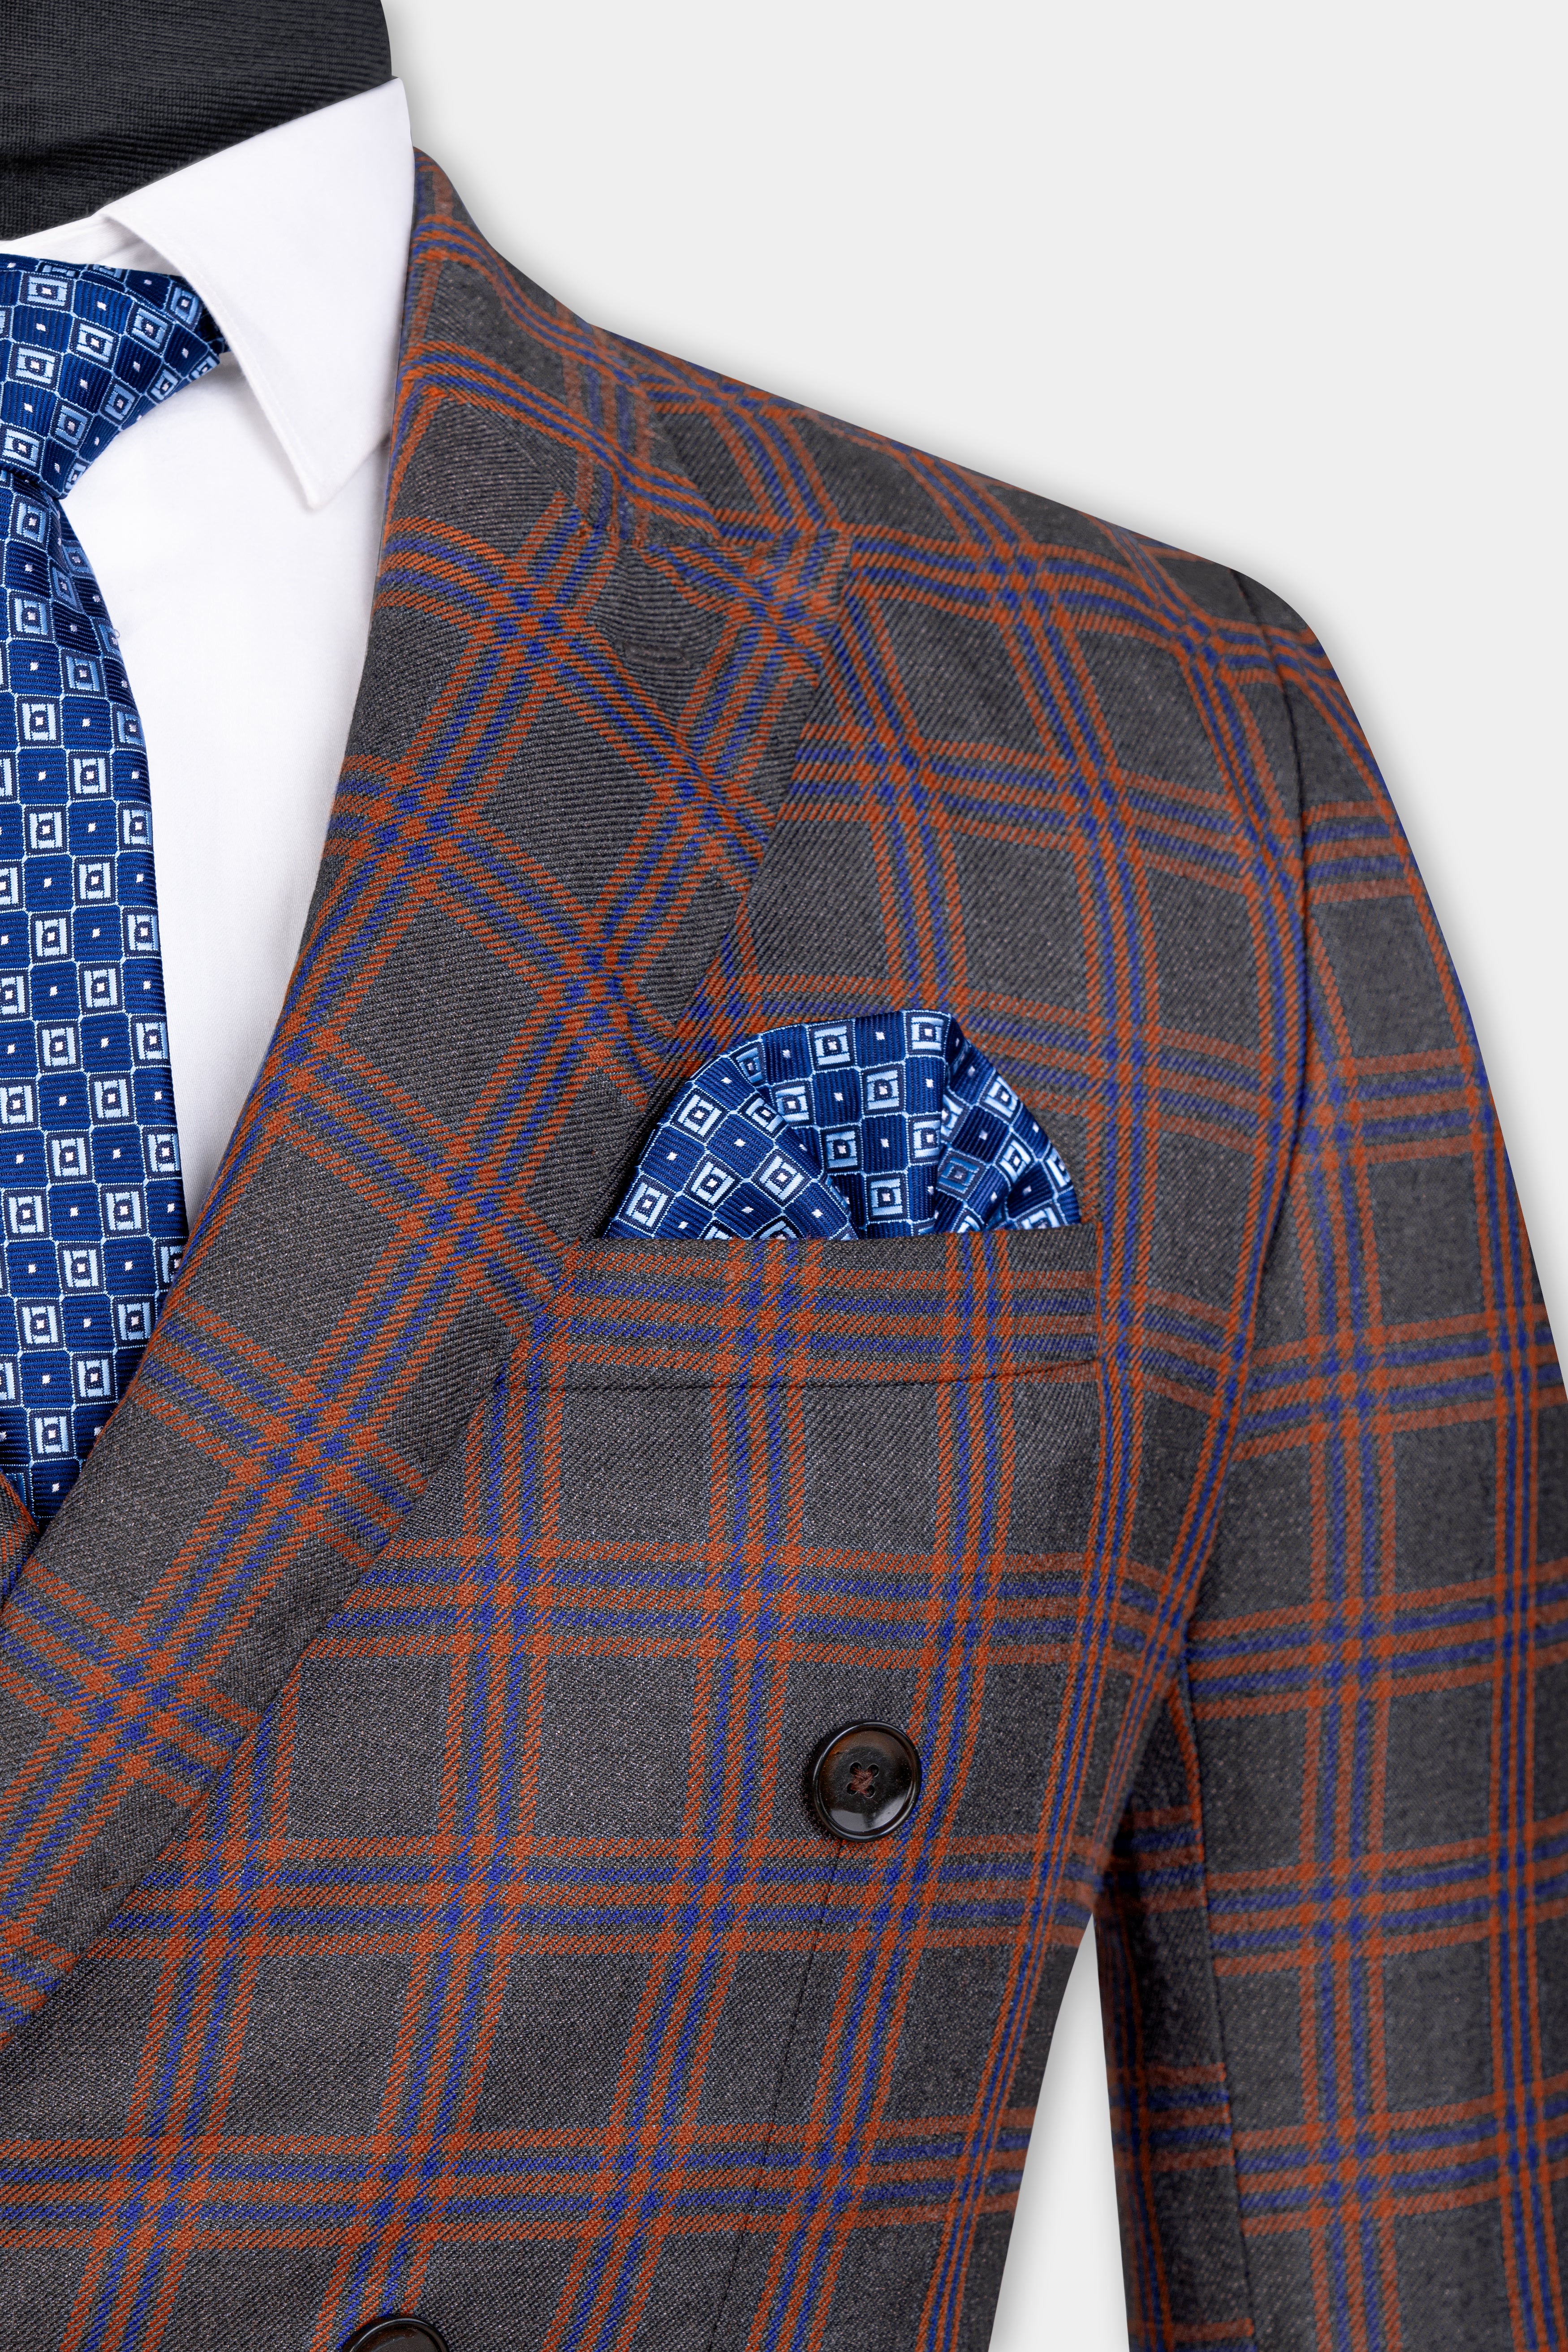 Emperor Gray and Russet Brown Plaid Tweed Double Breasted Blazer